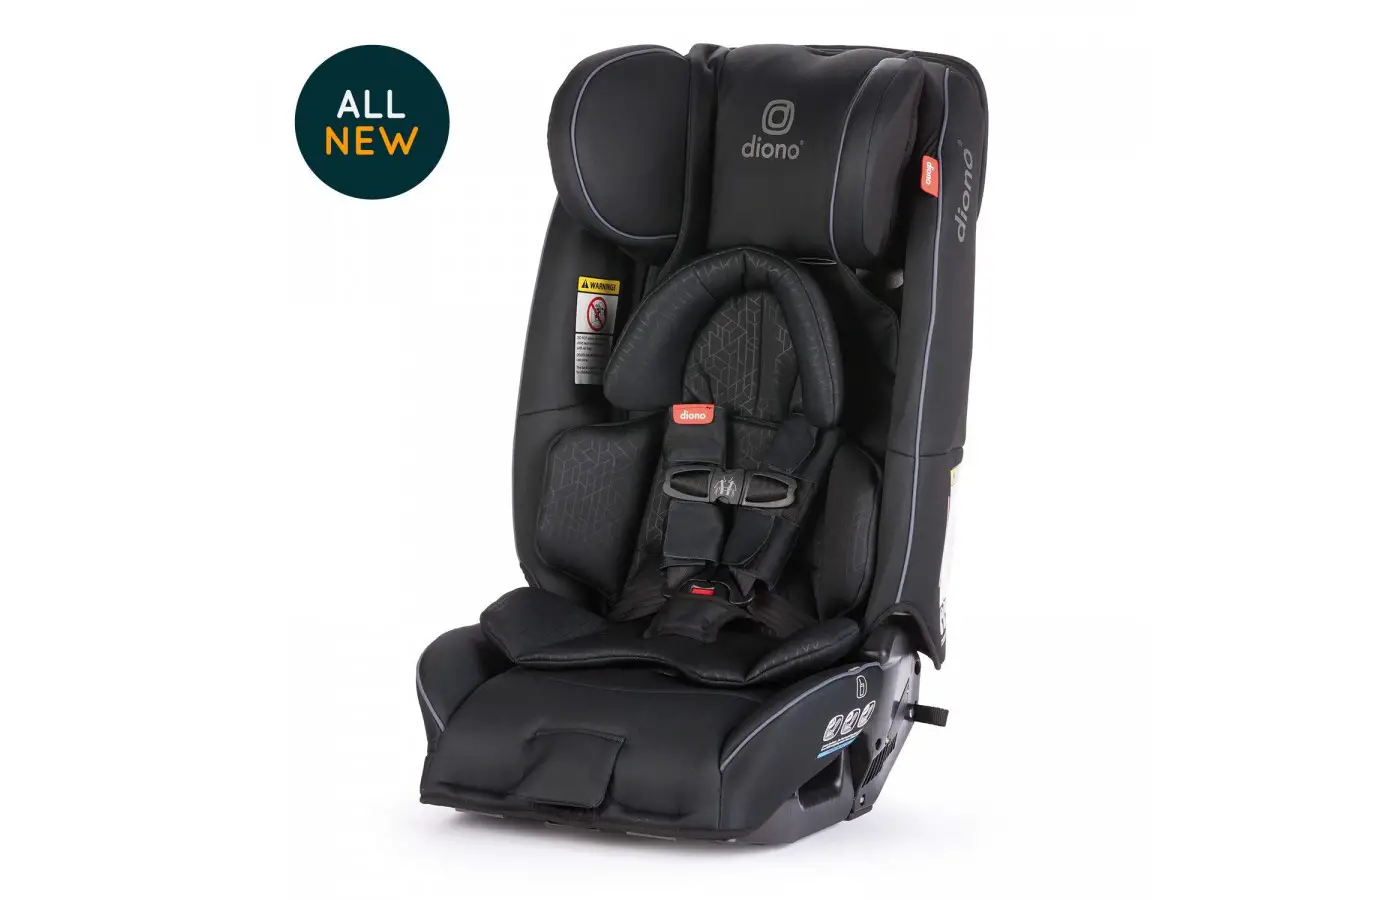 This car seat has plenty of safety features.